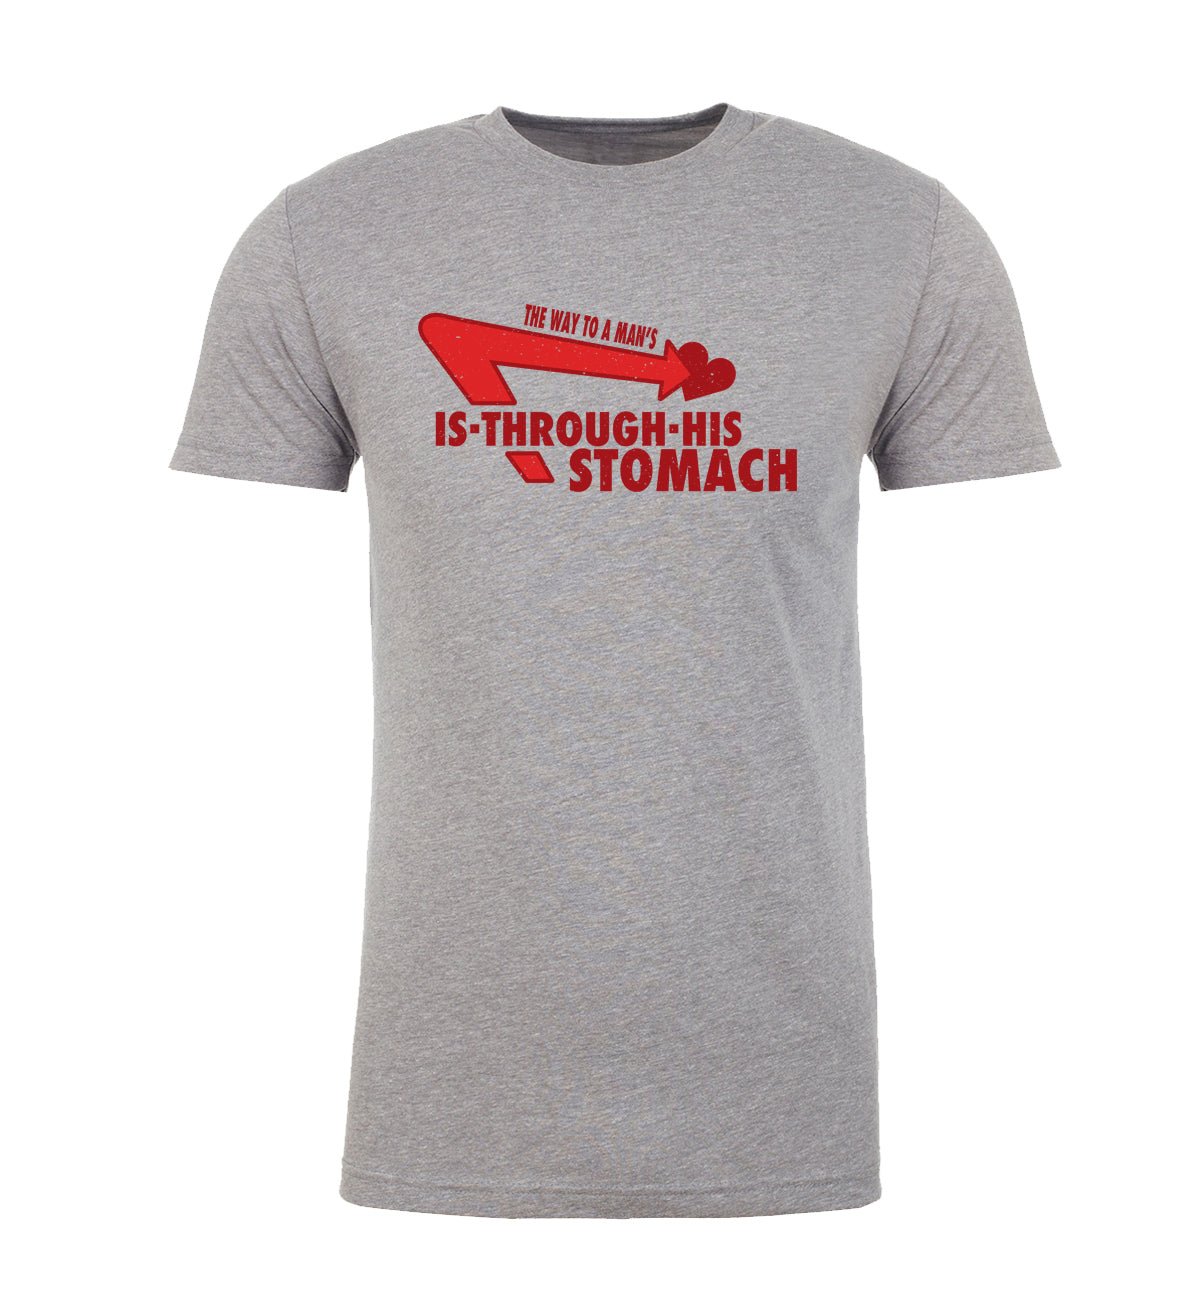 The Way to a Man's Heart Is Through His Stomach (Quick Burger) Mens T Shirts - Mato & Hash